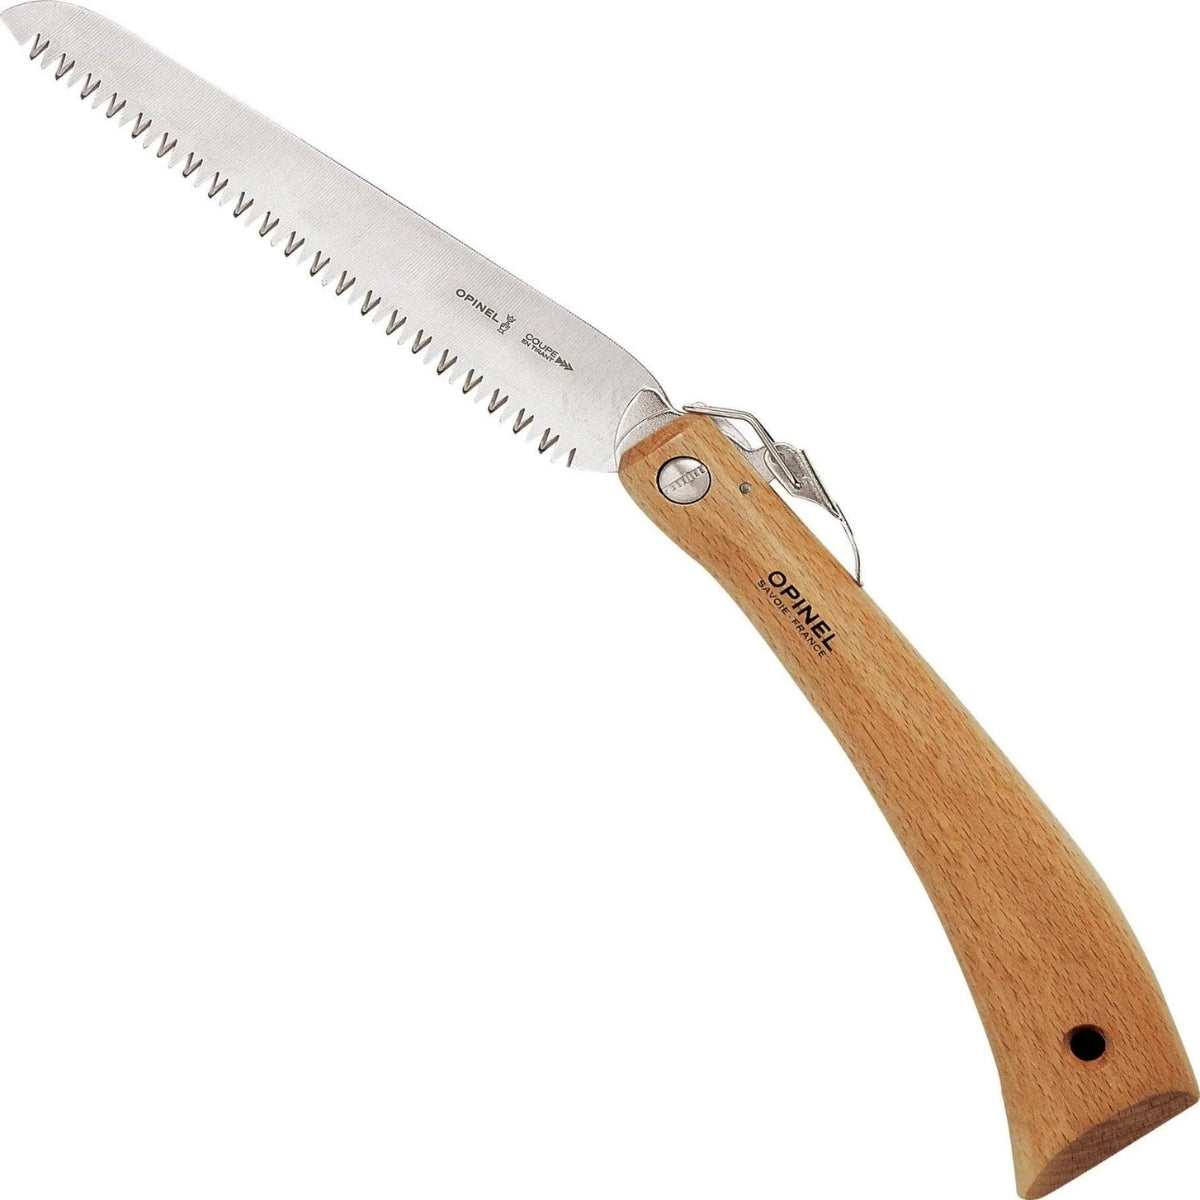 No.18 Carbon Steel Folding Garden Saw-OPINEL USA